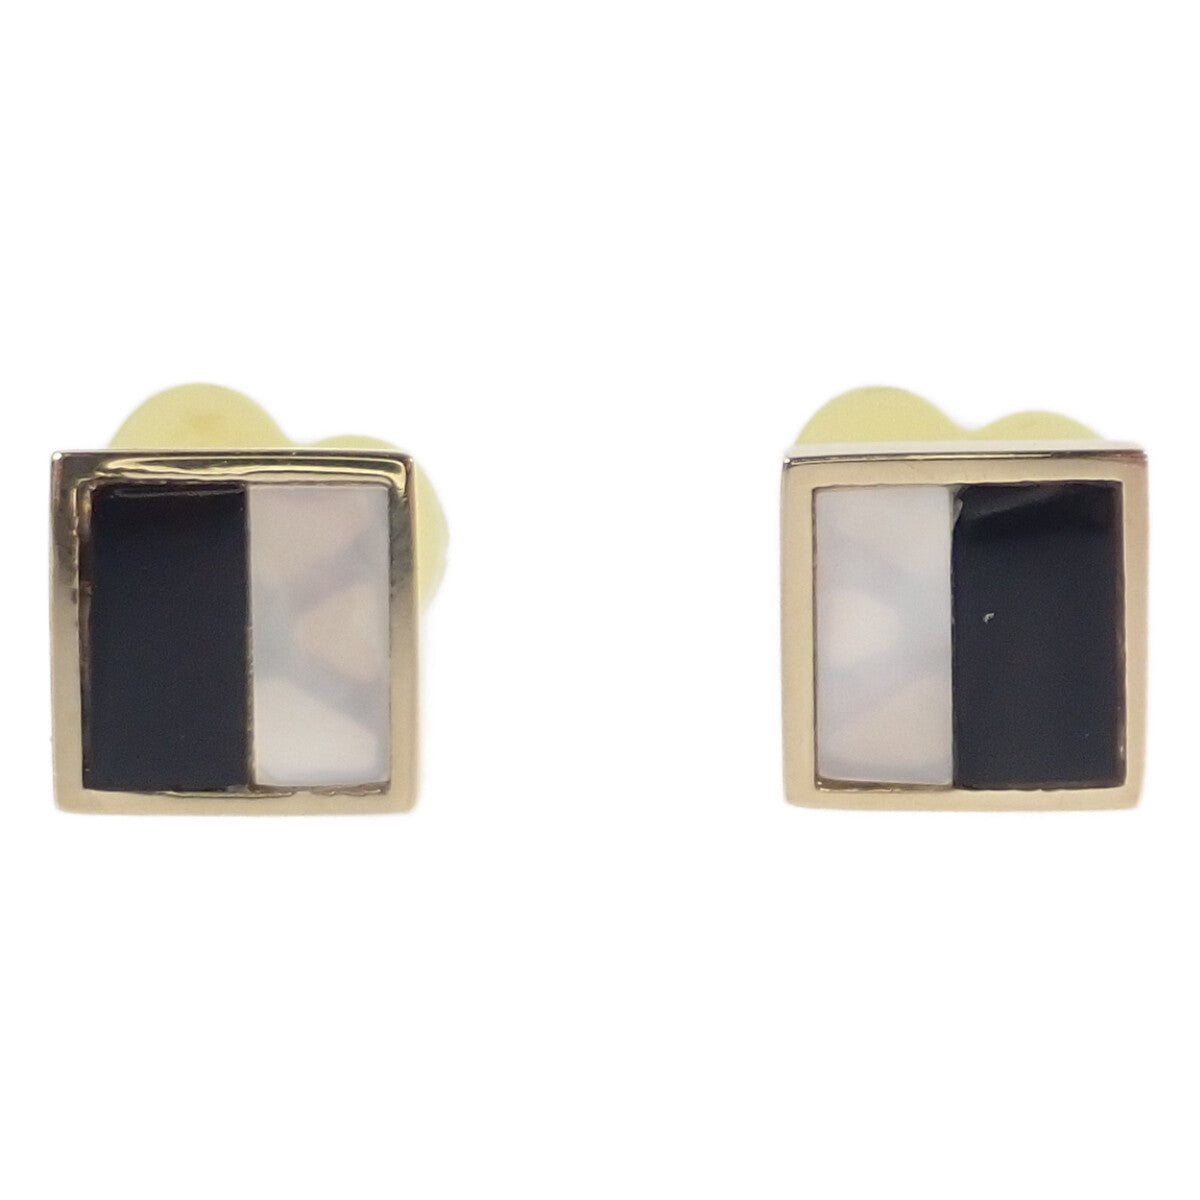 LuxUness  K18 Yellow Gold, Square Design, Onyx Shell Black Earrings for Women  in Excellent condition